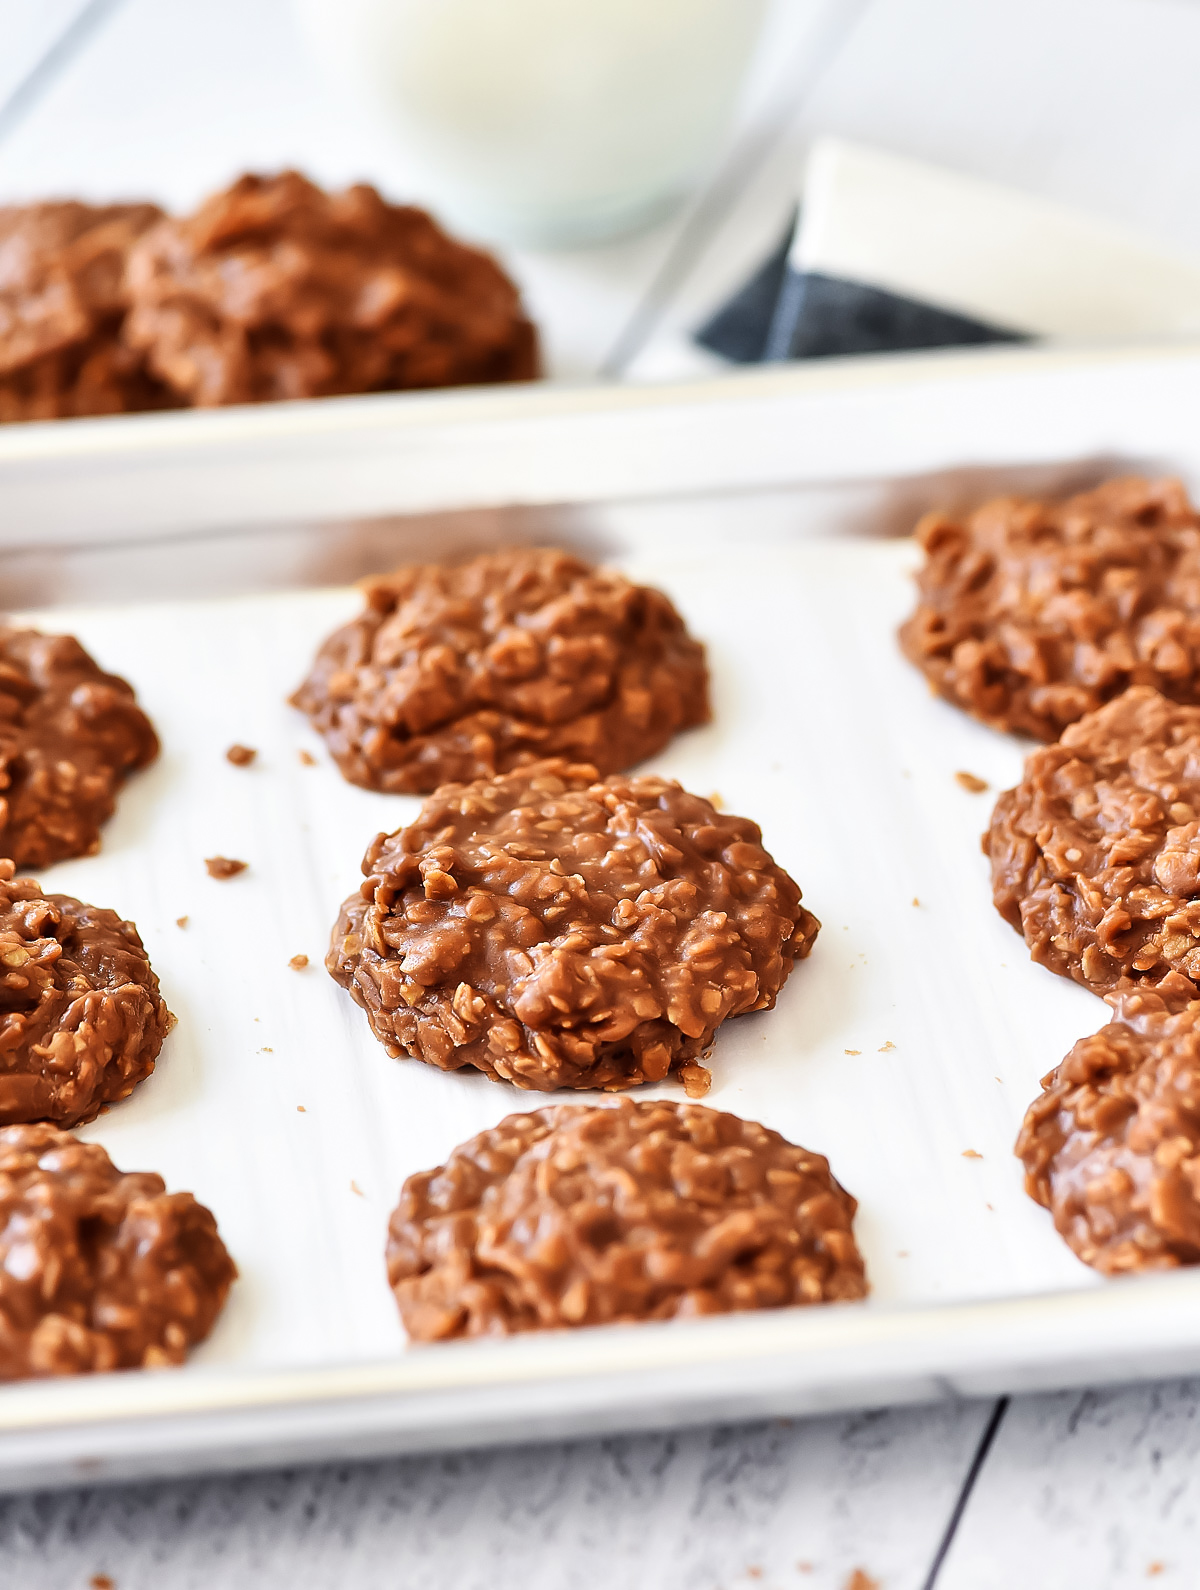 These No Bake Cookies are filled with chocolate, peanut butter, oats and more! Life-in-the-Lofthouse.com